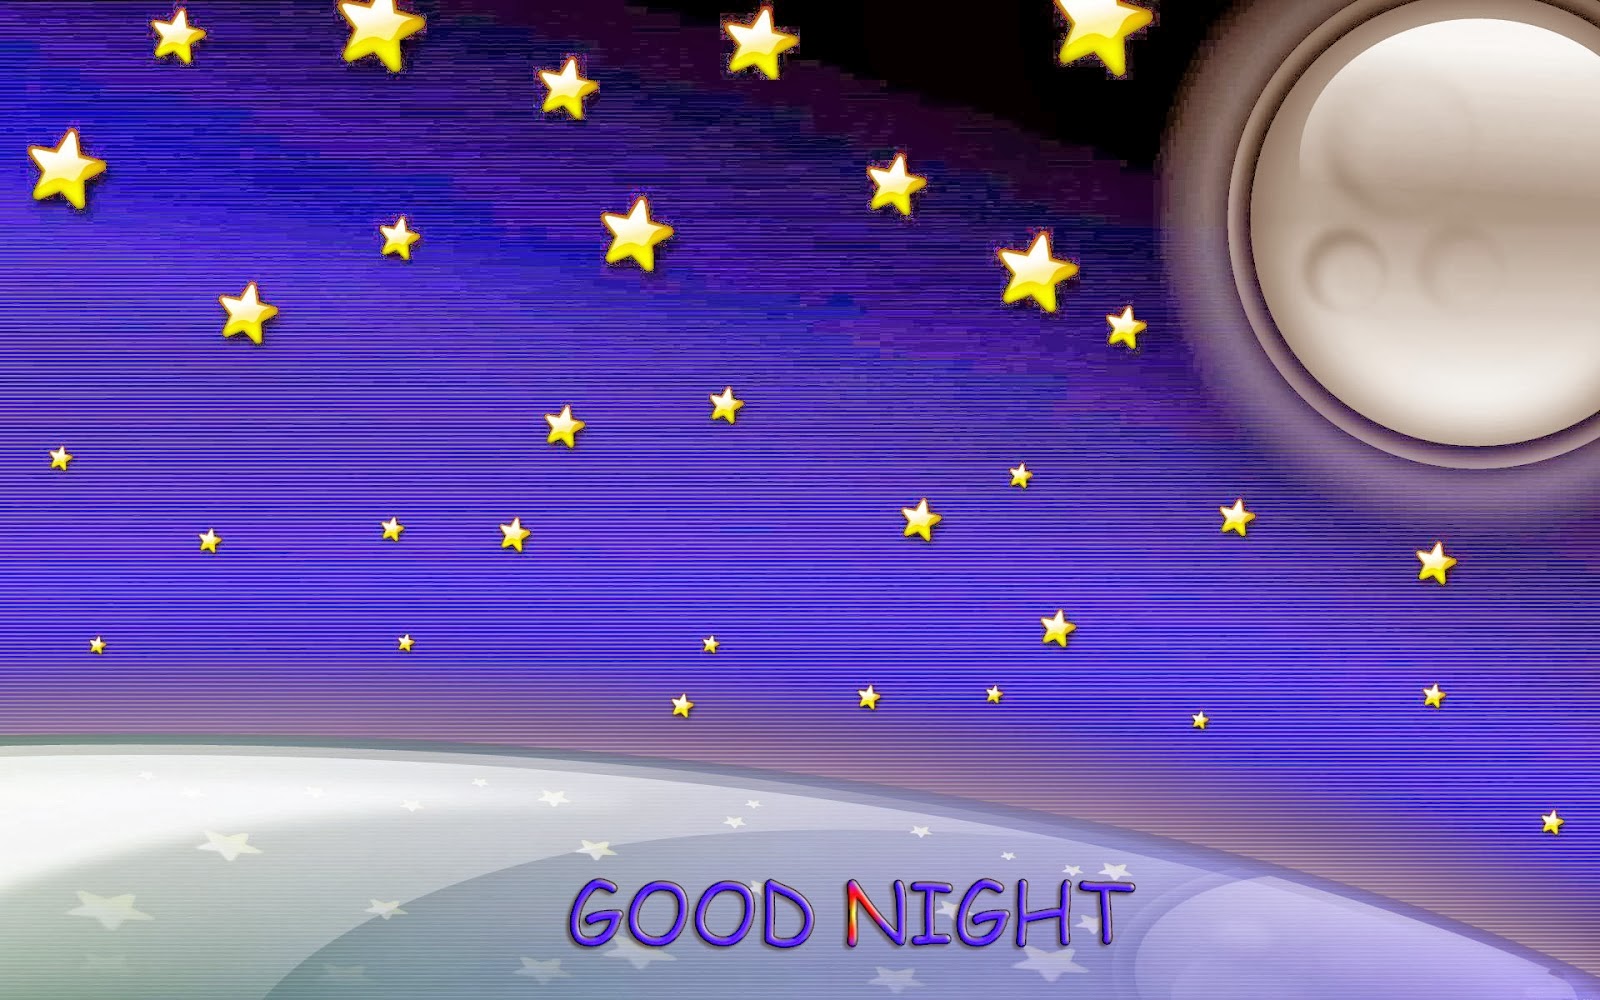 Good Night Wallpaper Pictures Gallery